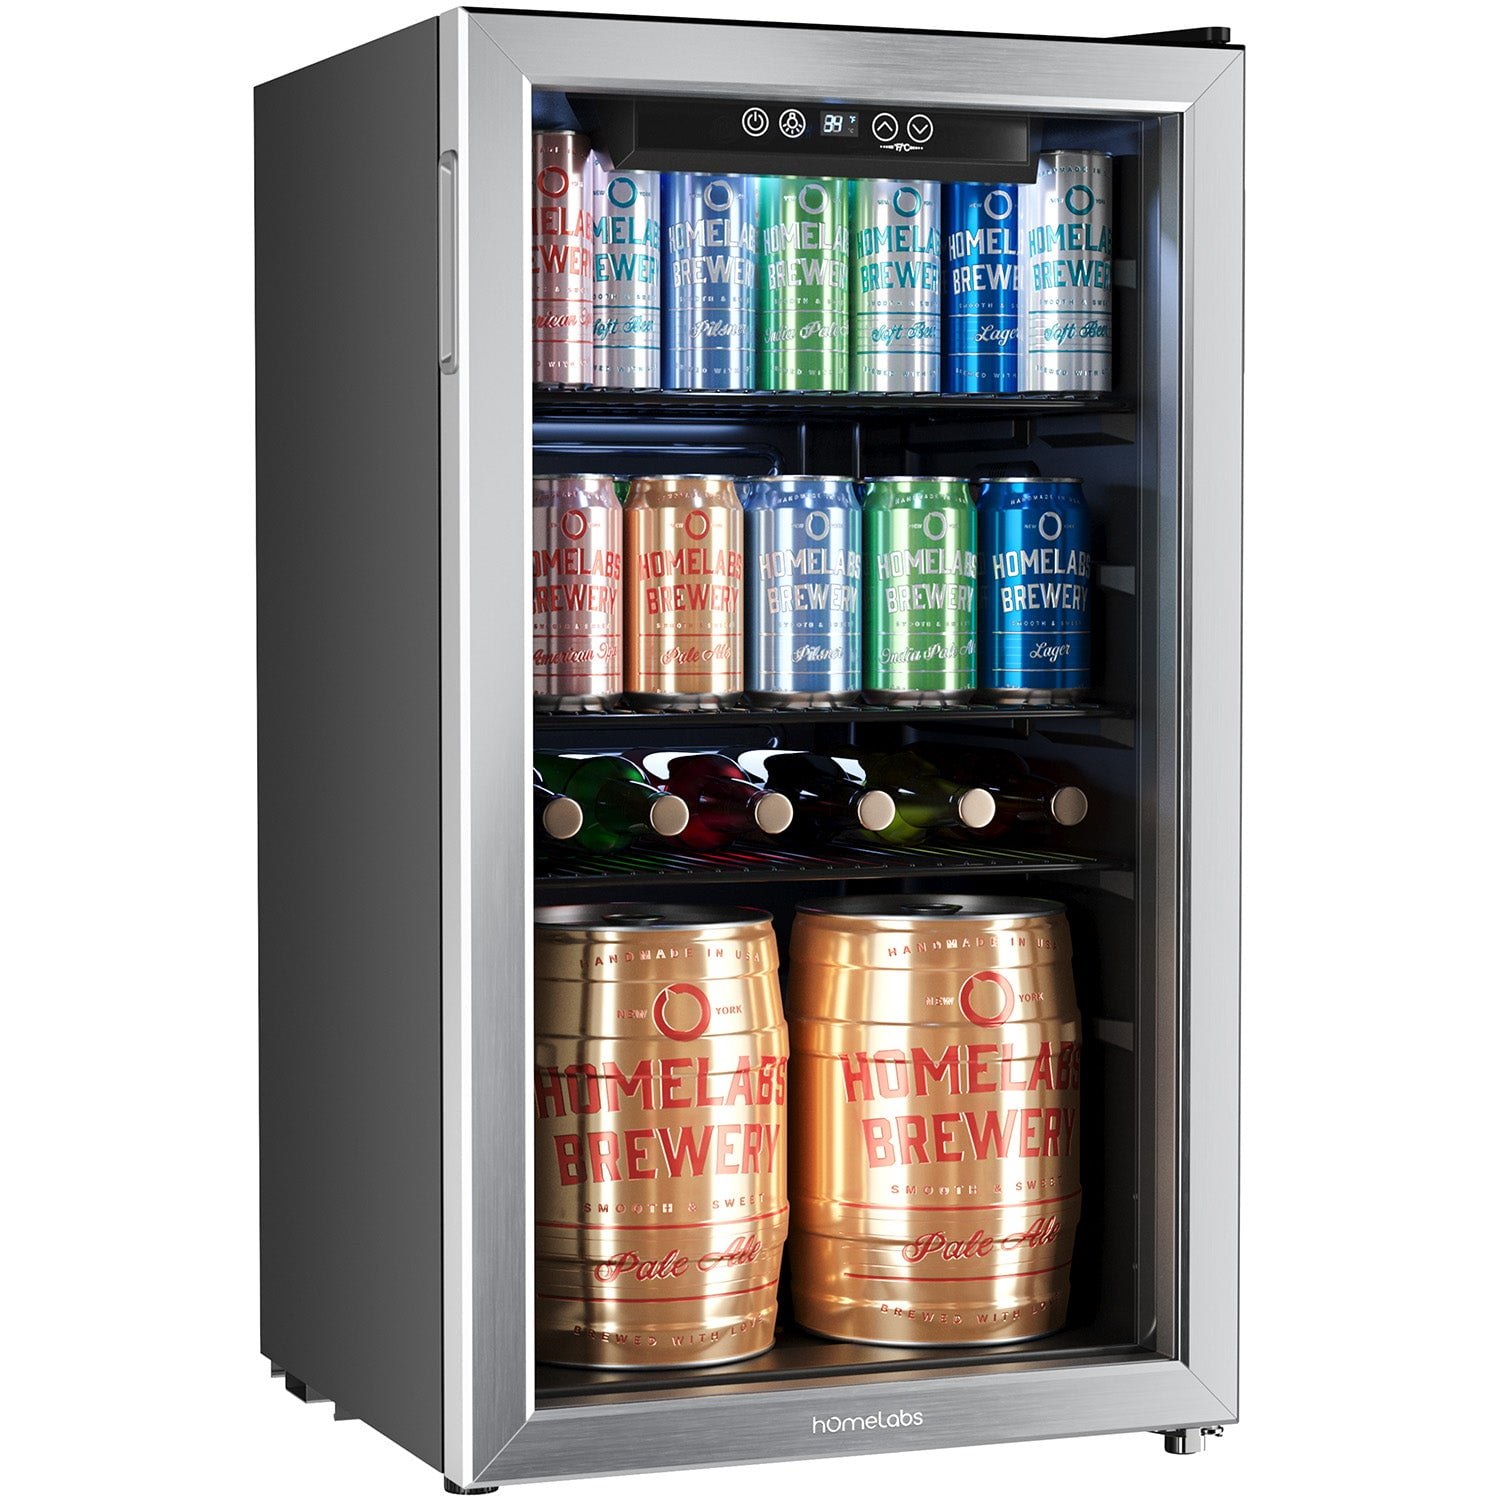 ZipChill Instant Beverage Spinner Chiller, Universal Can Cooler for Drinks,  Rapidly Chills Beer and Soda Cans in 60 Seconds, No Batteries Required